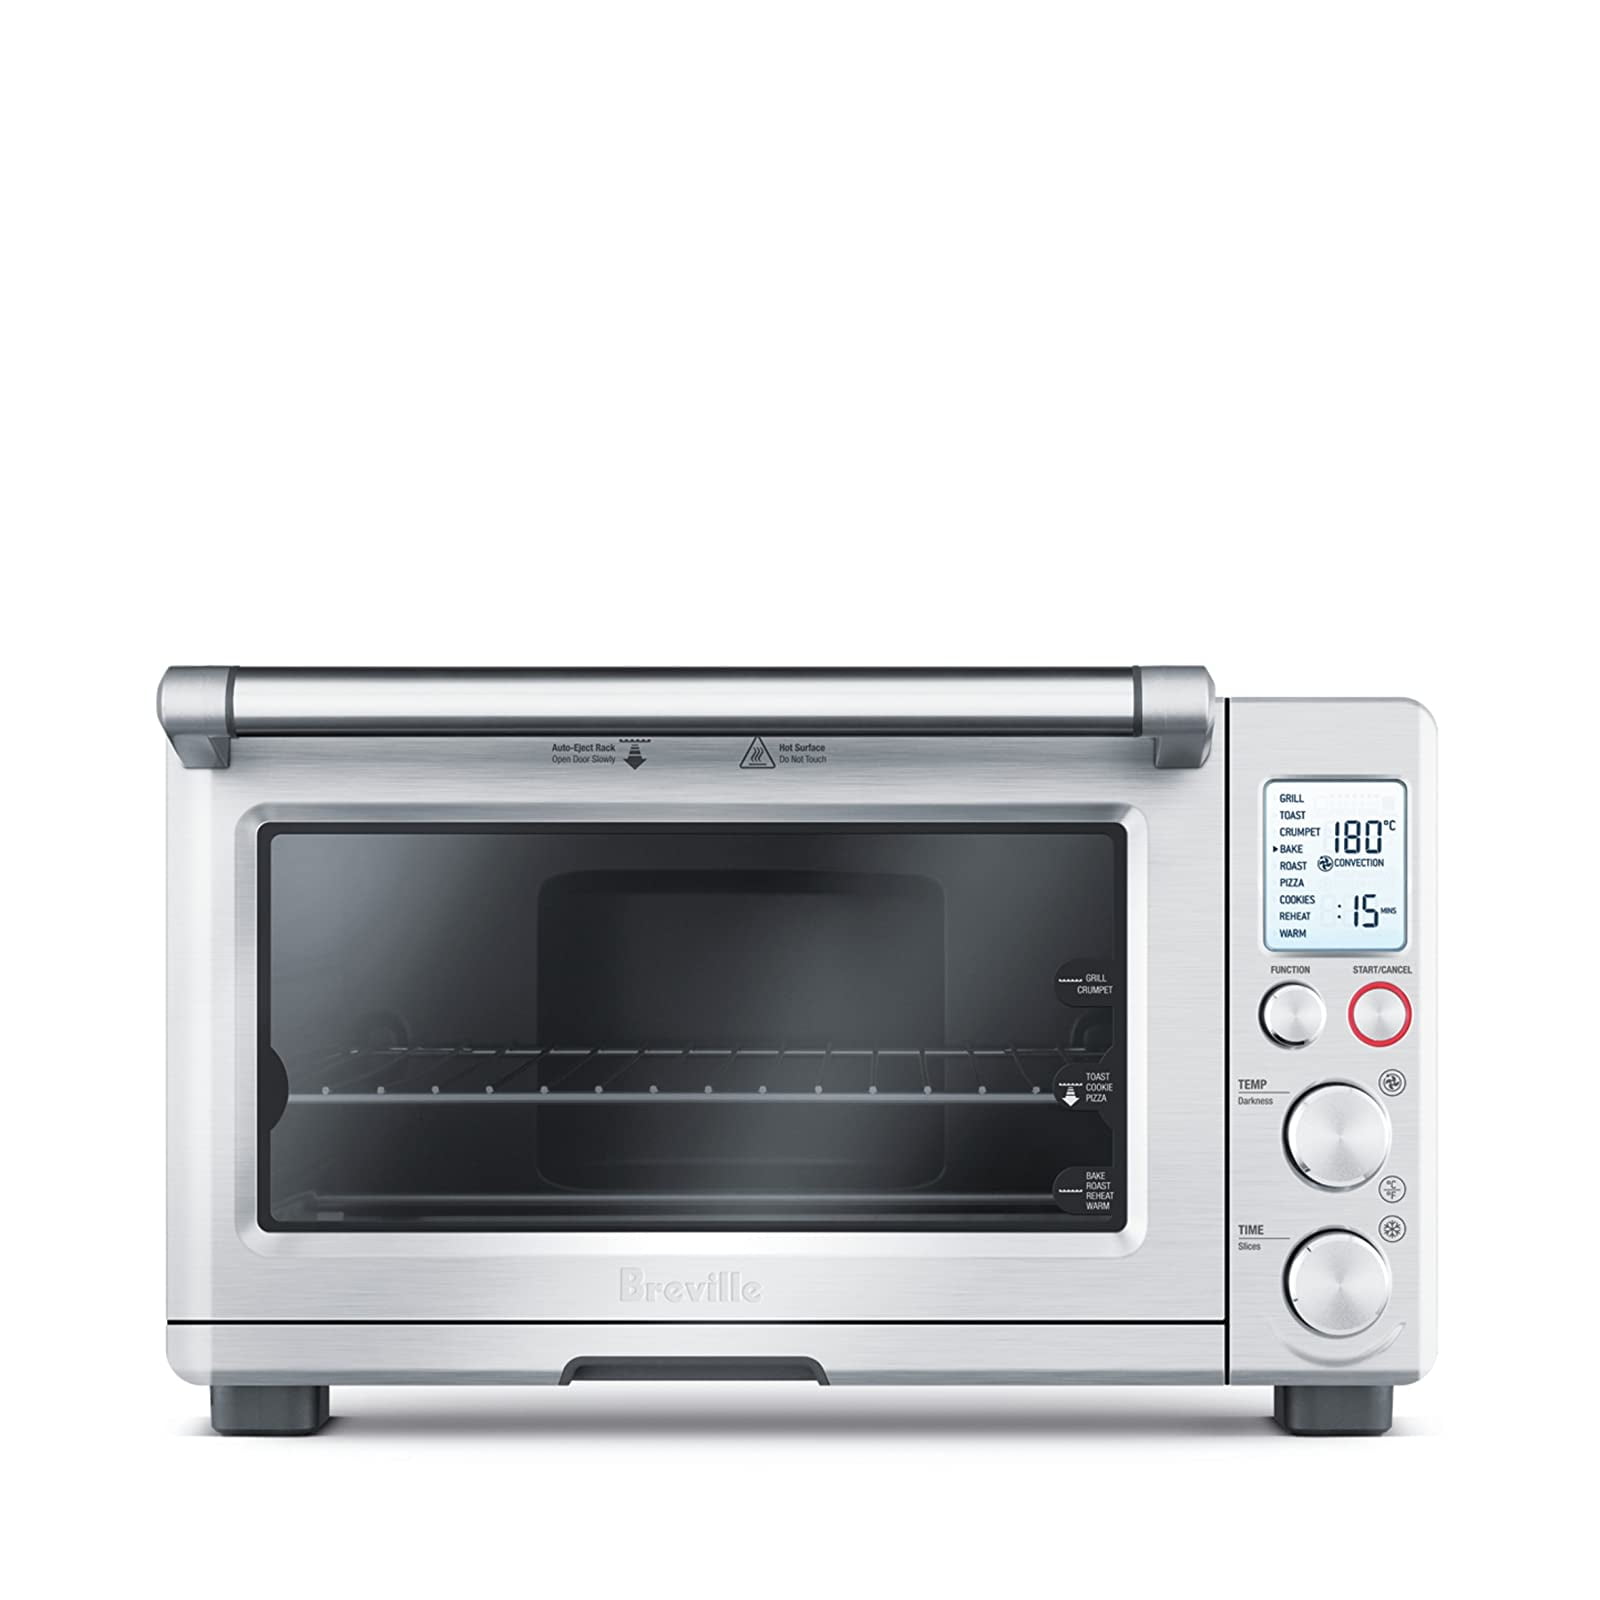 Breville BOV800XL Smart Oven 1800-Watt Convection Toaster Oven with